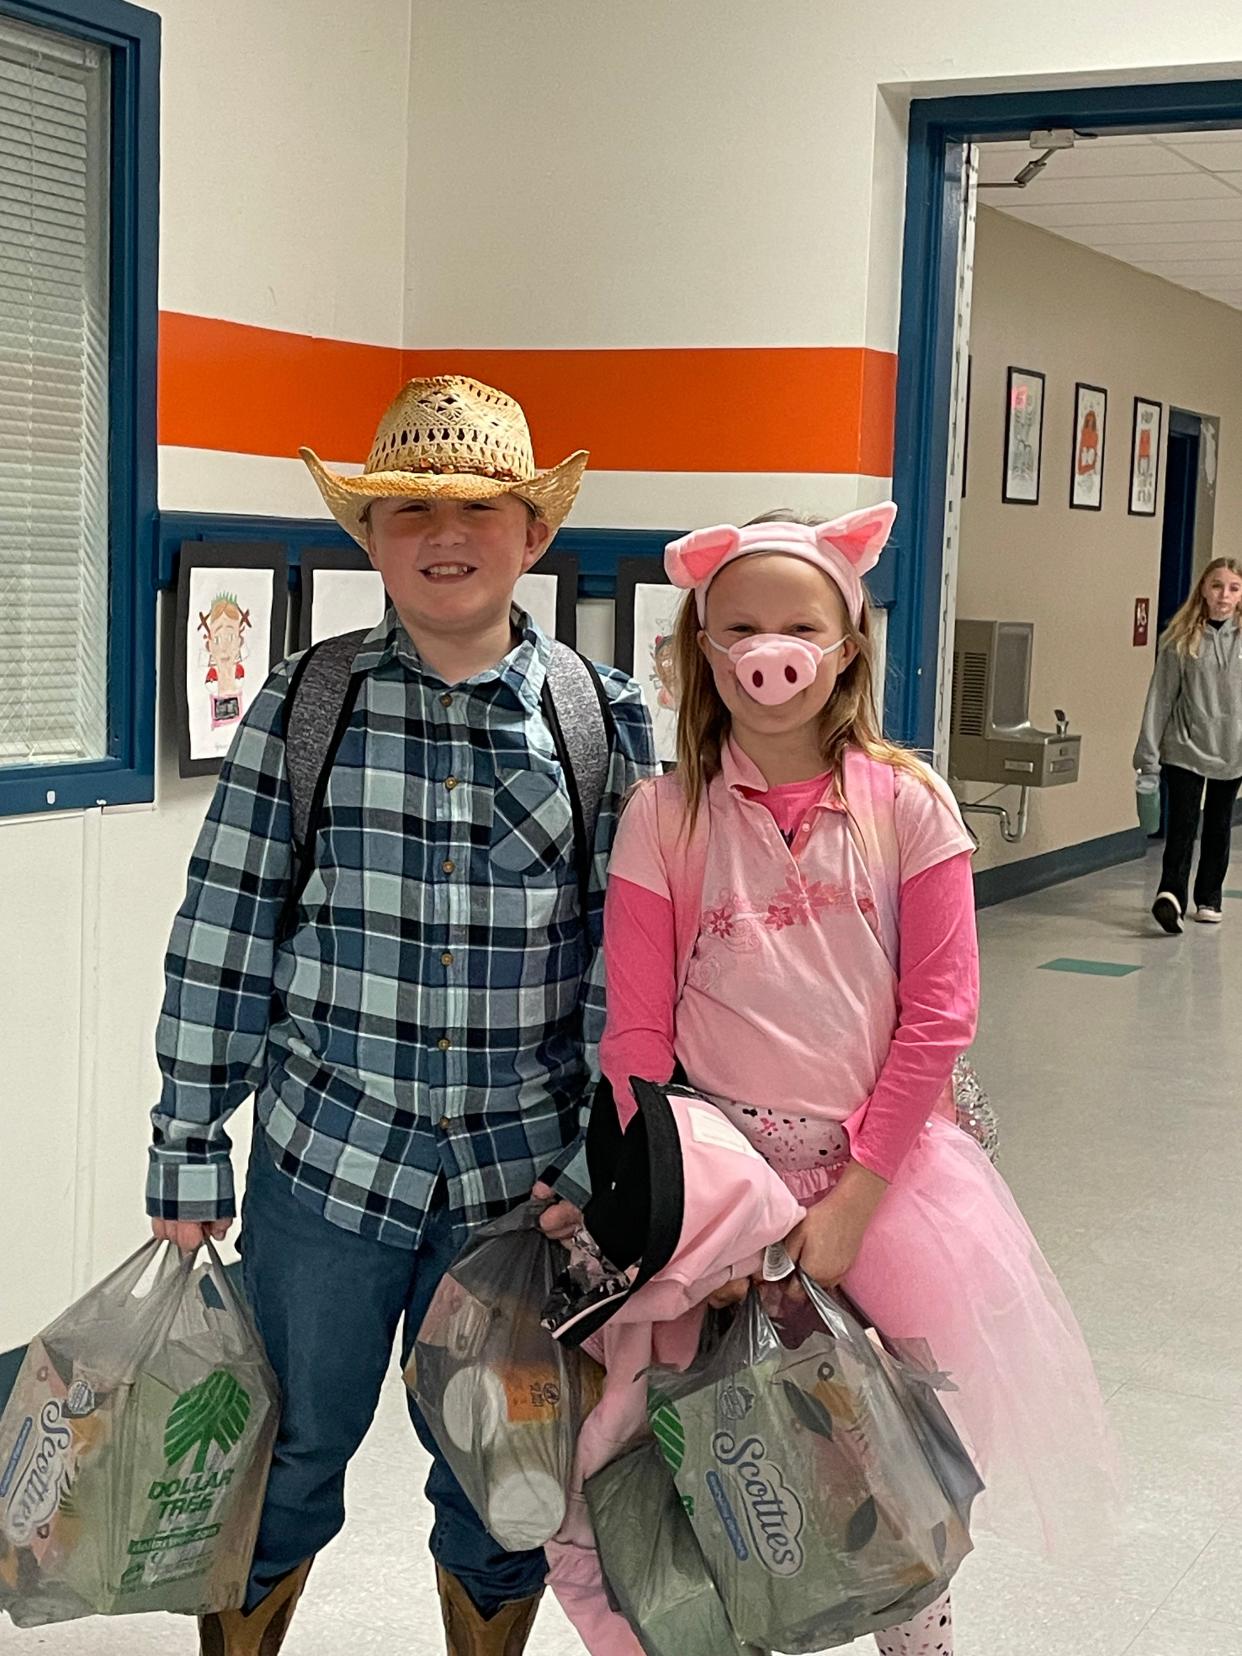 Fourth grade Kiser Elementary School students dressed up for a Charlotte's Web costume contest during Read Across America week.